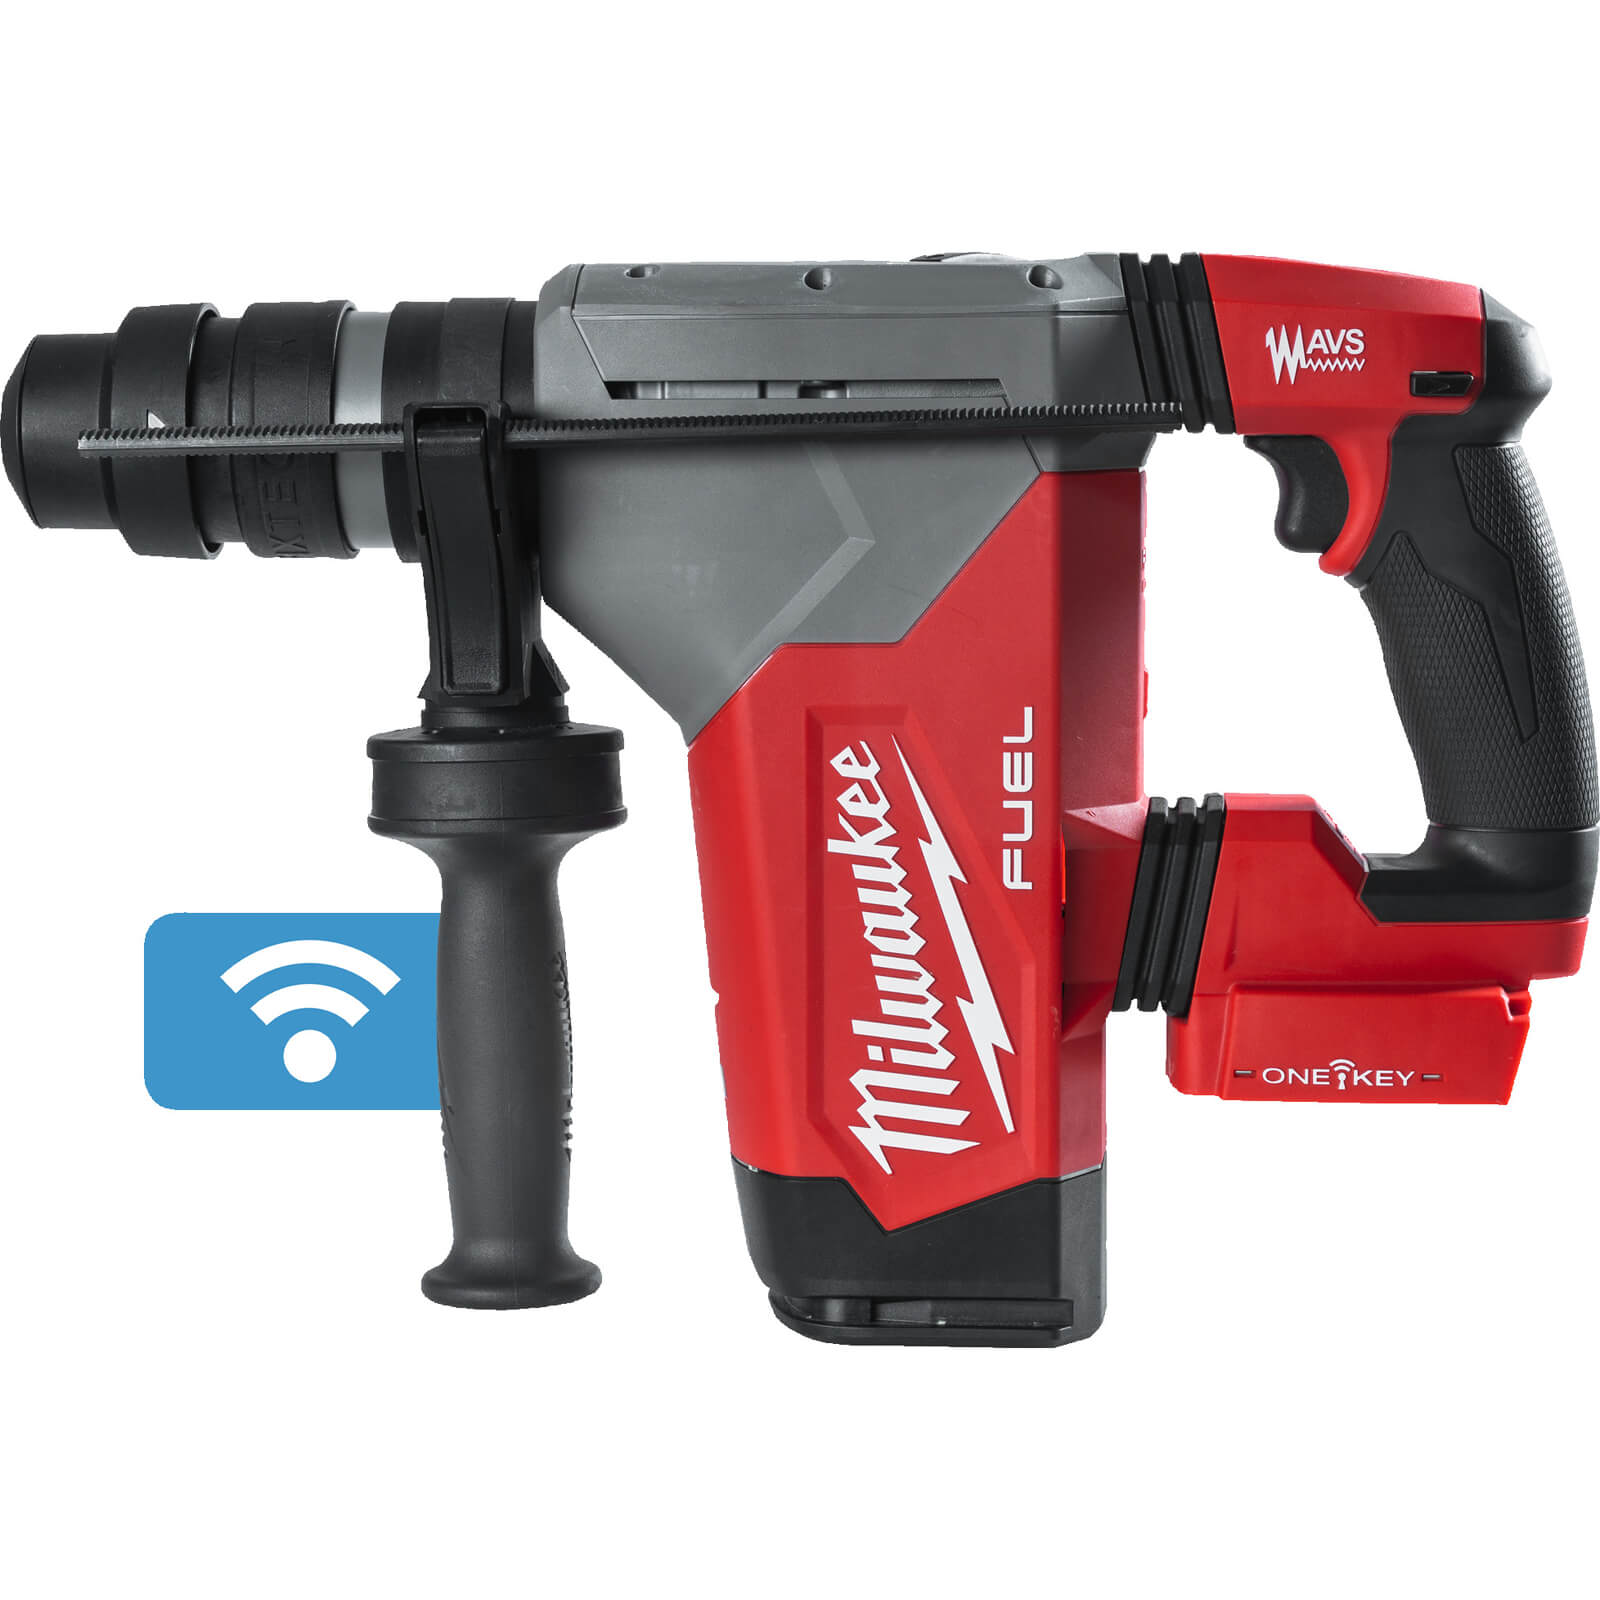 Milwaukee M18 ONEFHPX Fuel 18v Cordless Brushless SDS Plus Drill No Batteries No Charger Case